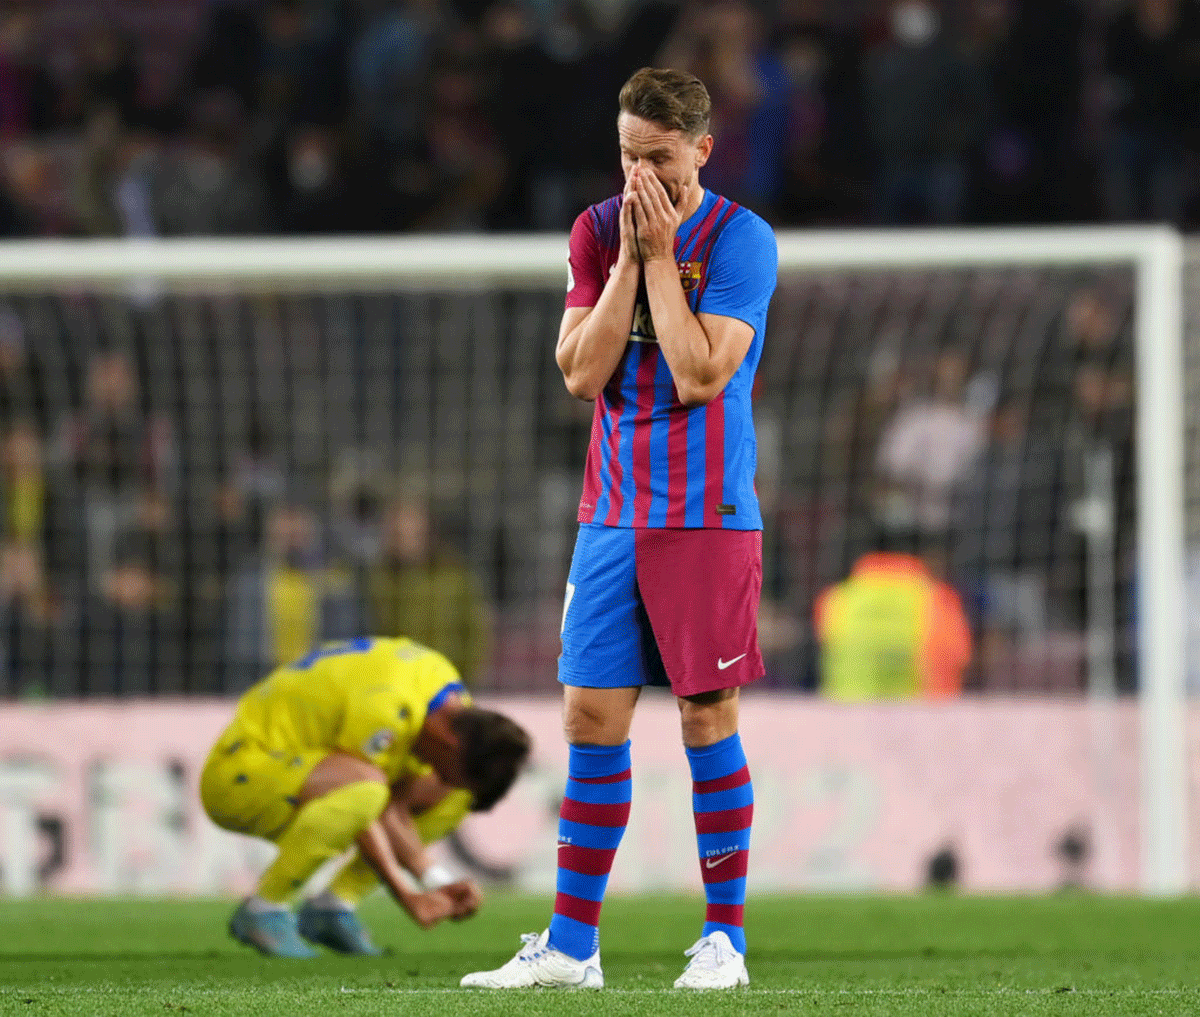 Barcelona's Luuk de Jong reacts after the final whistle of the La Liga match against Cadiz CF at Camp Nou in Barcelona on Monday